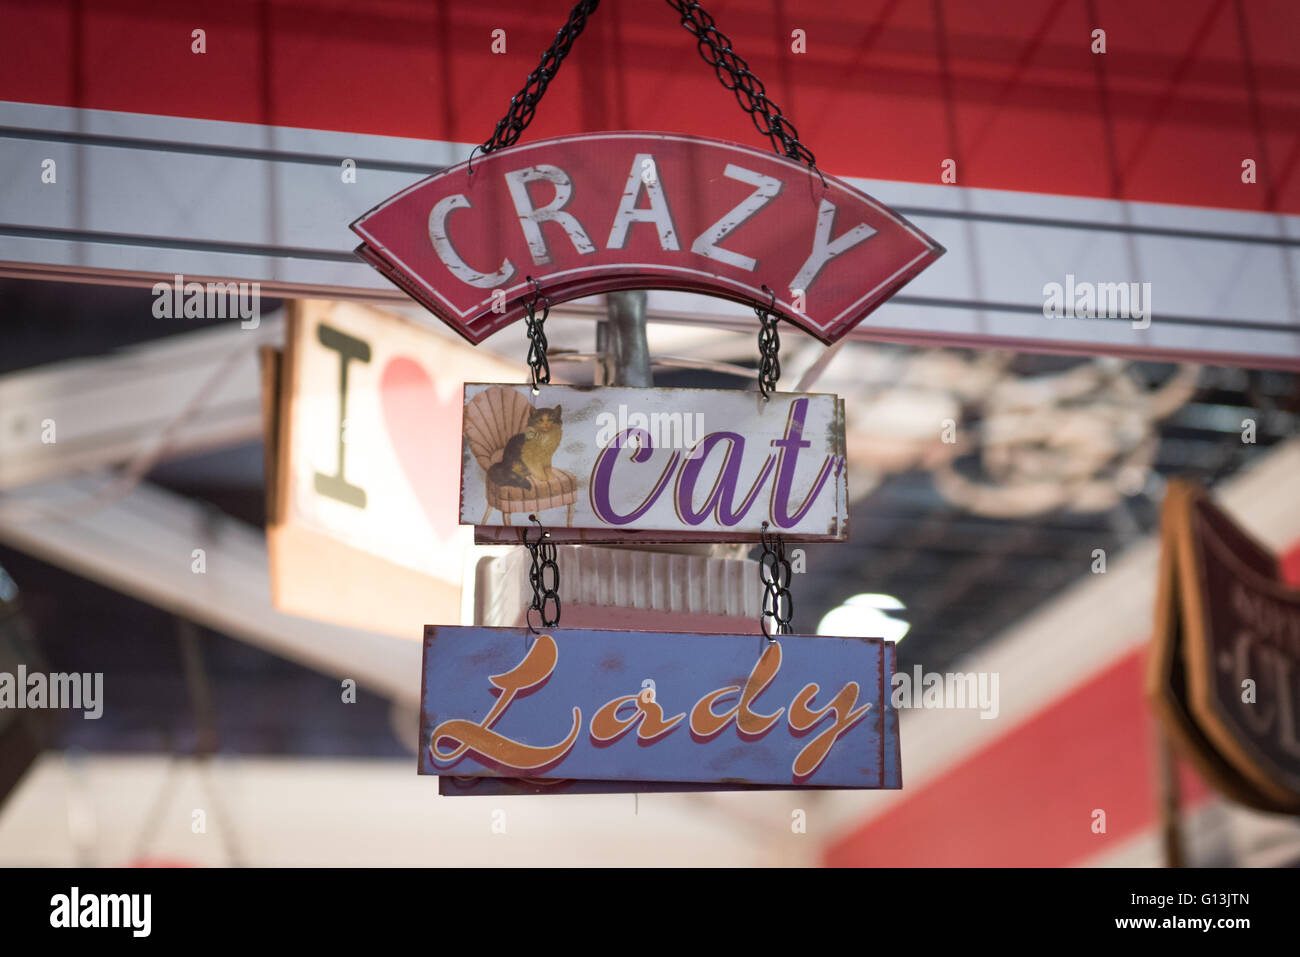 Crazy Cat Lady hanging sign banner at The National Pet Show at the Excel Centre 7th May 2016 in London, UK. Stock Photo